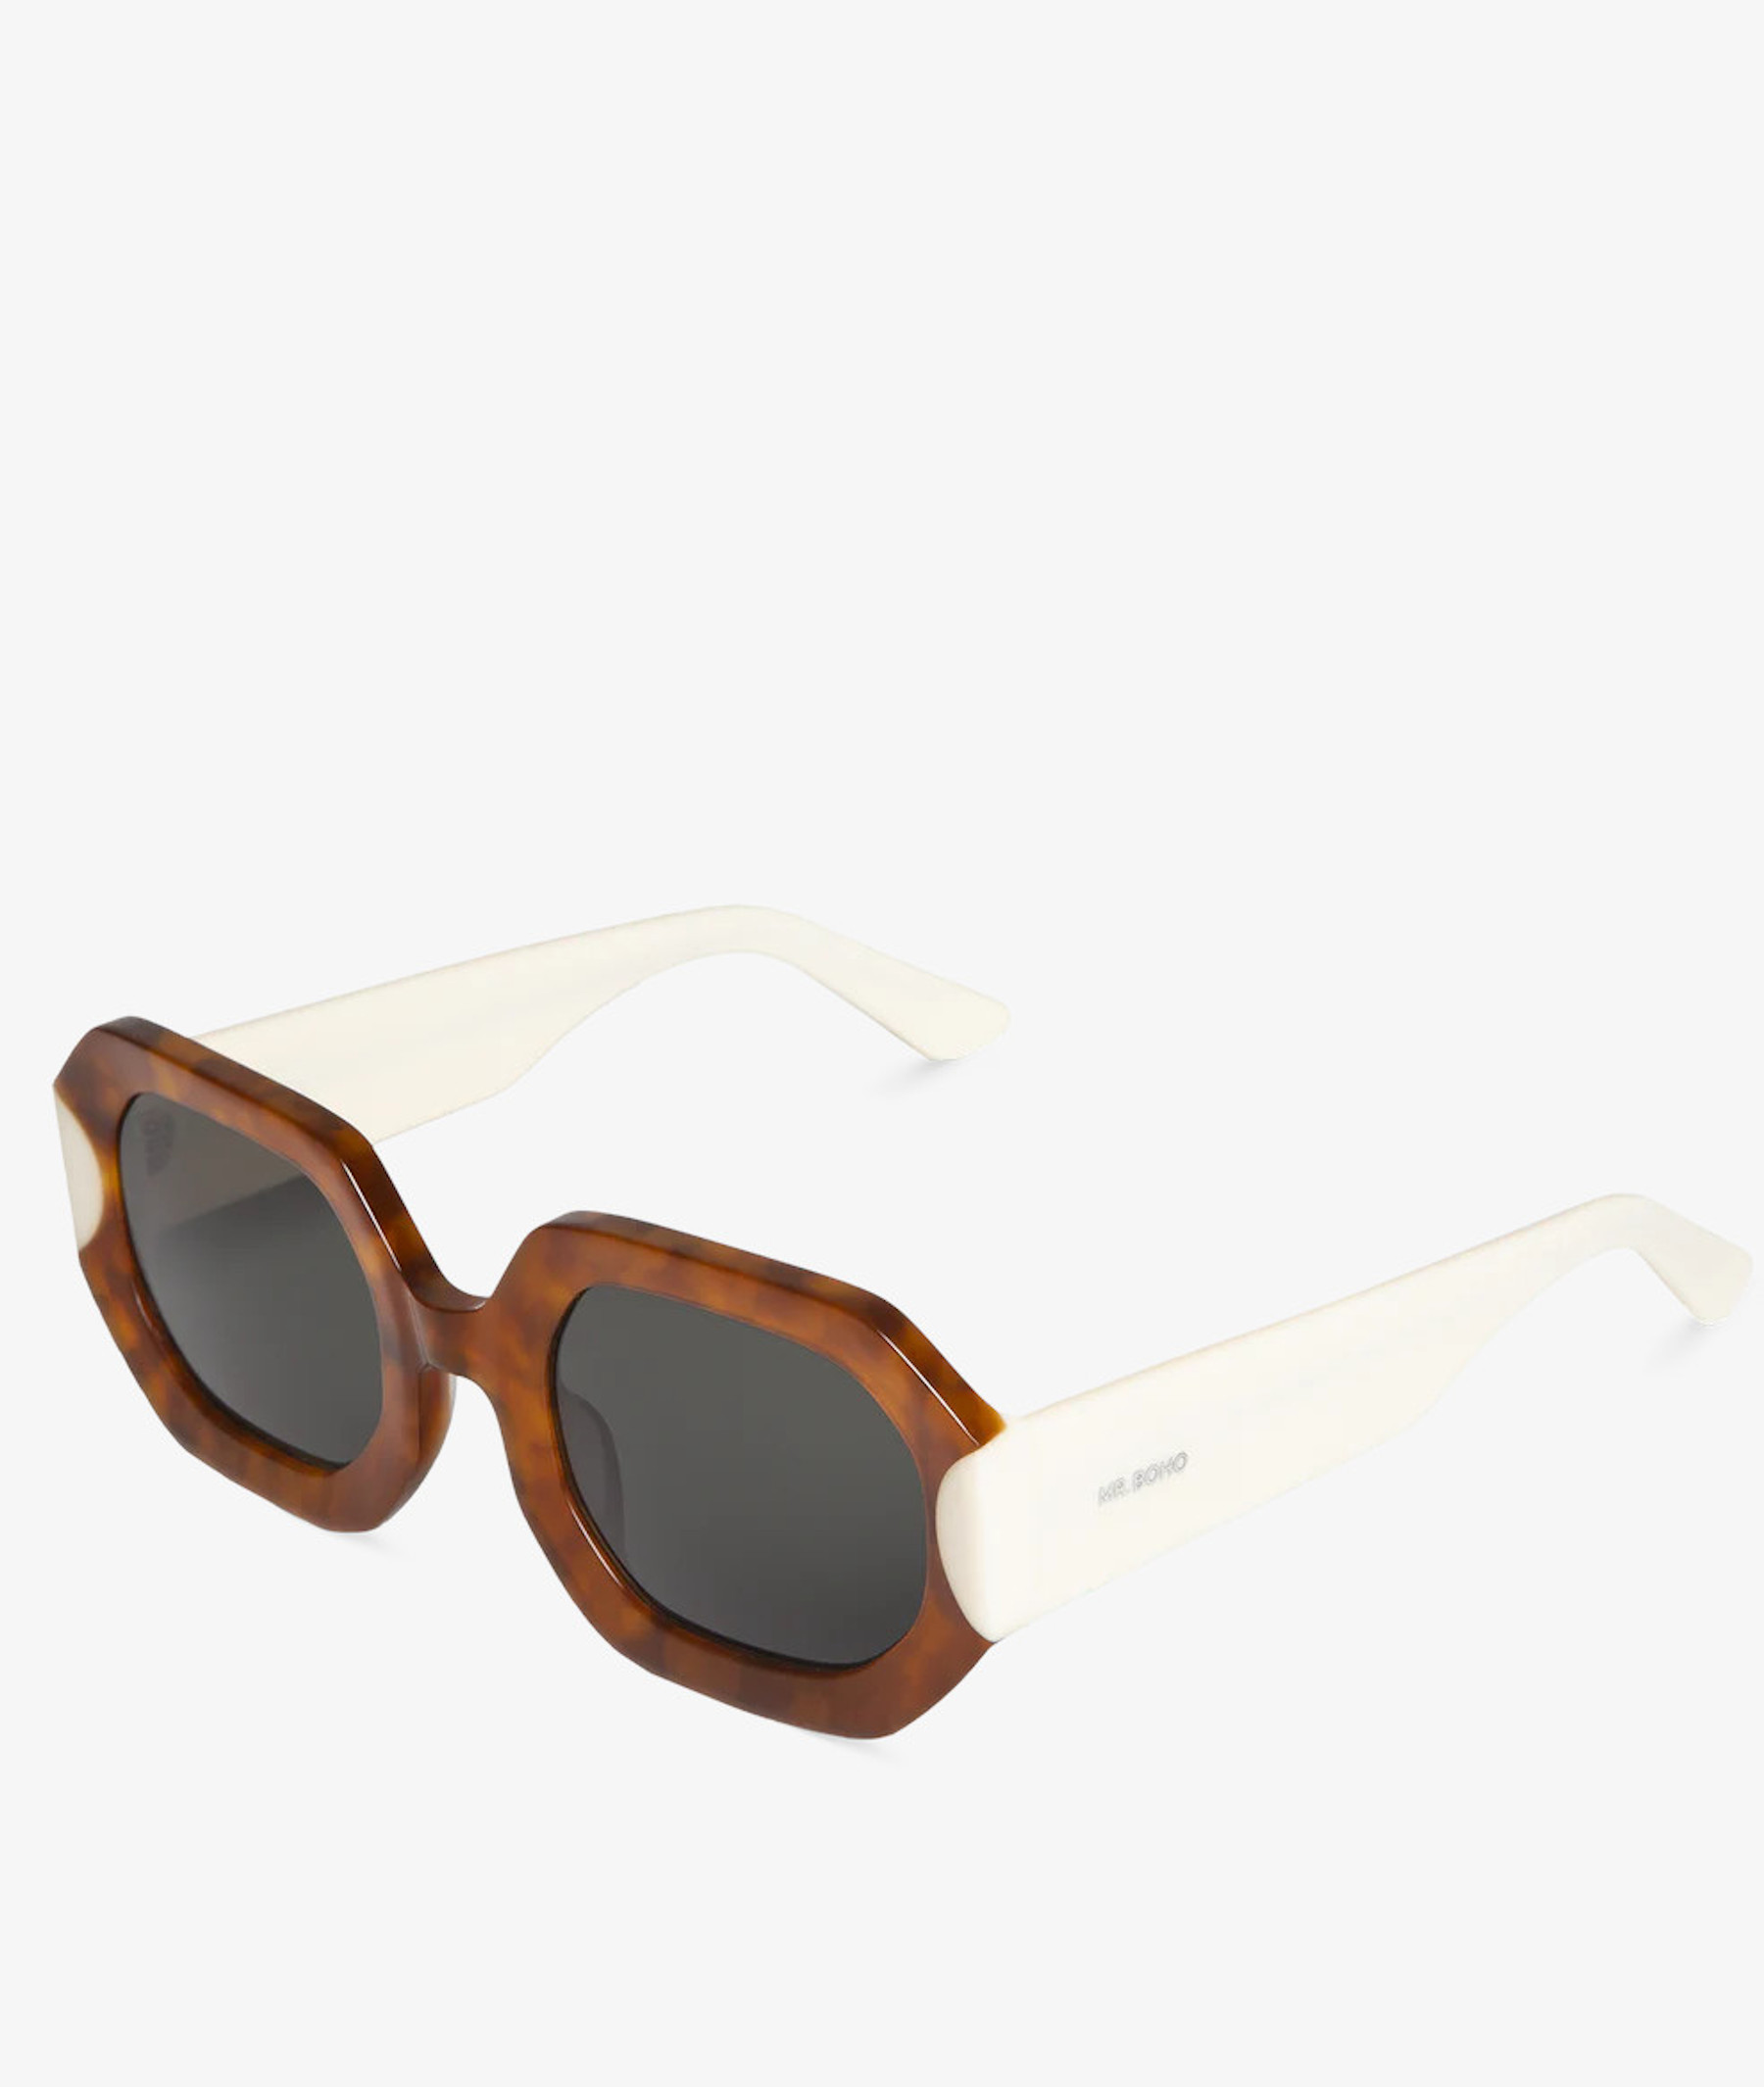 Look stylish this season with this camel Sunglasses from our Mr